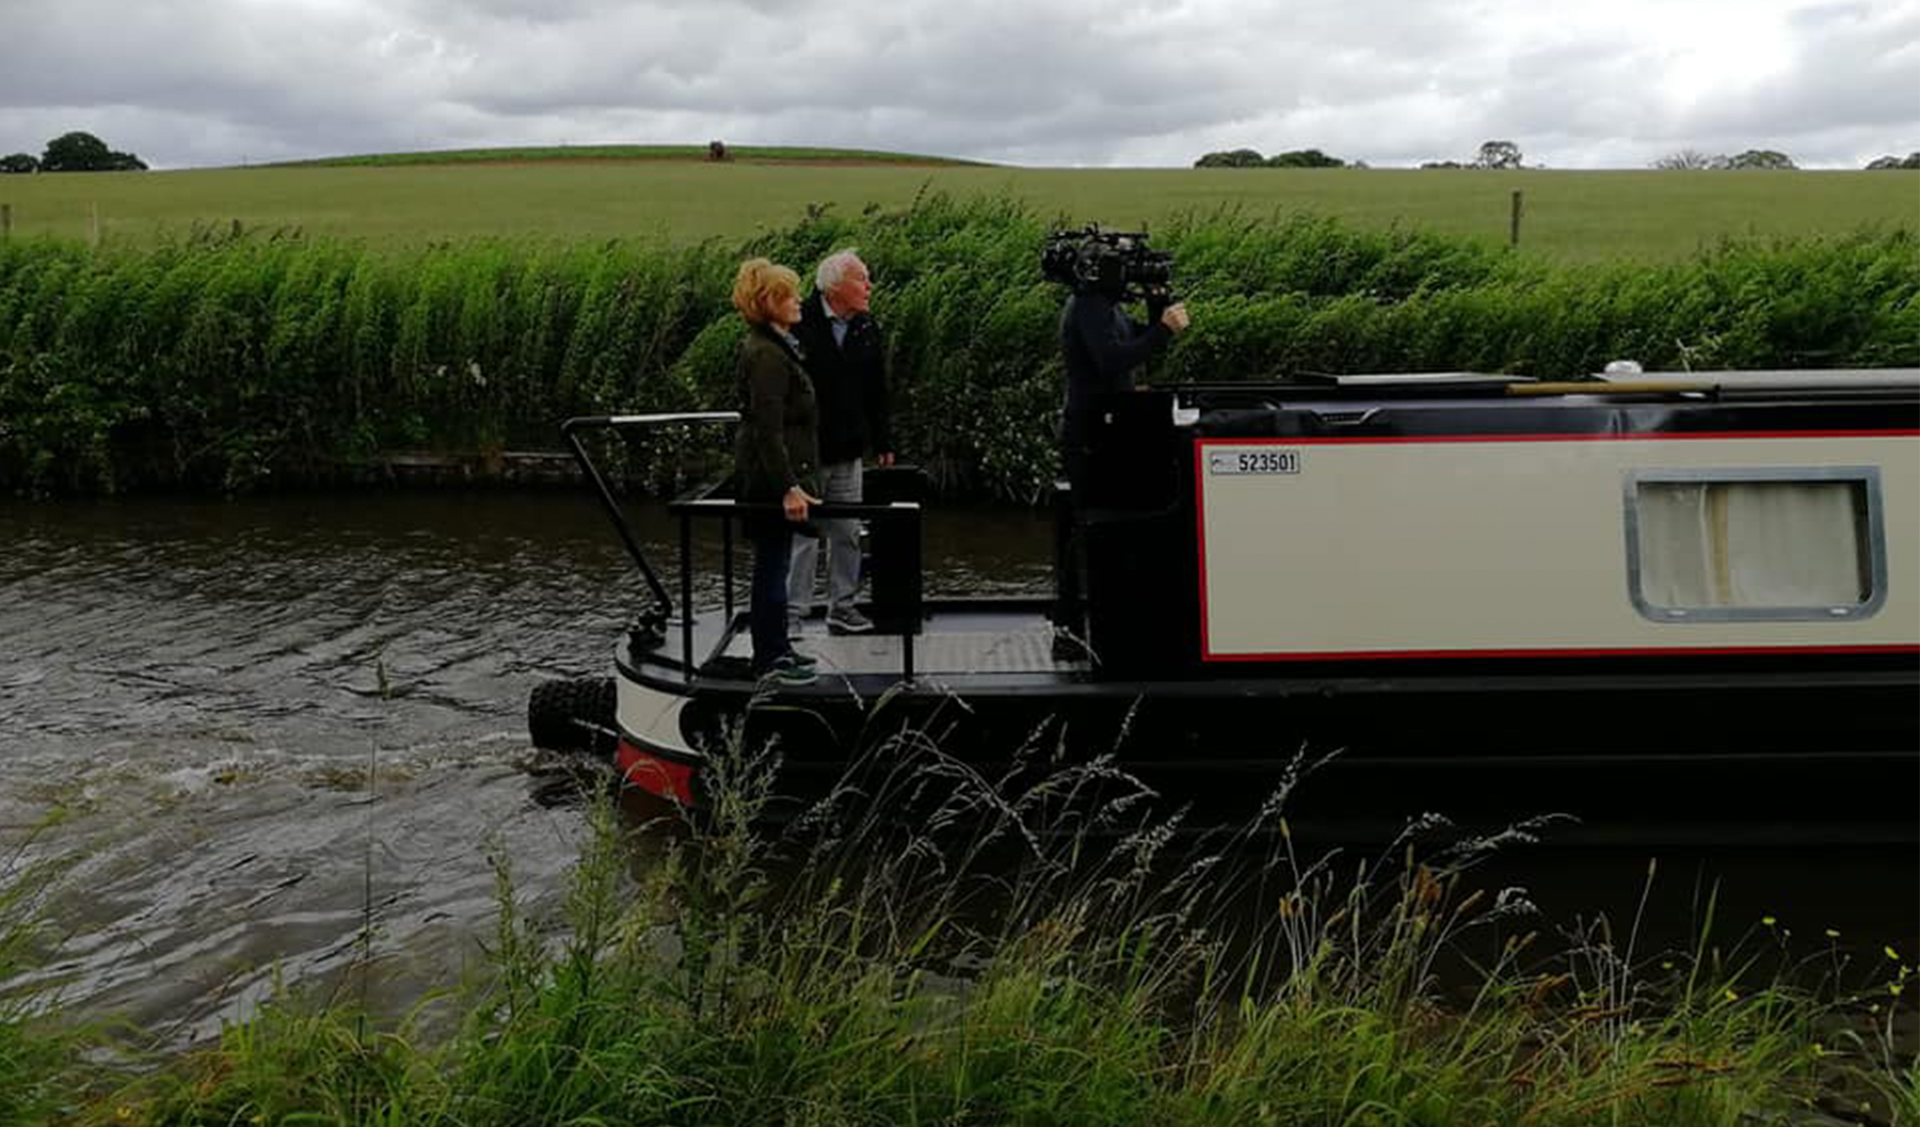 when was great canal journeys filmed